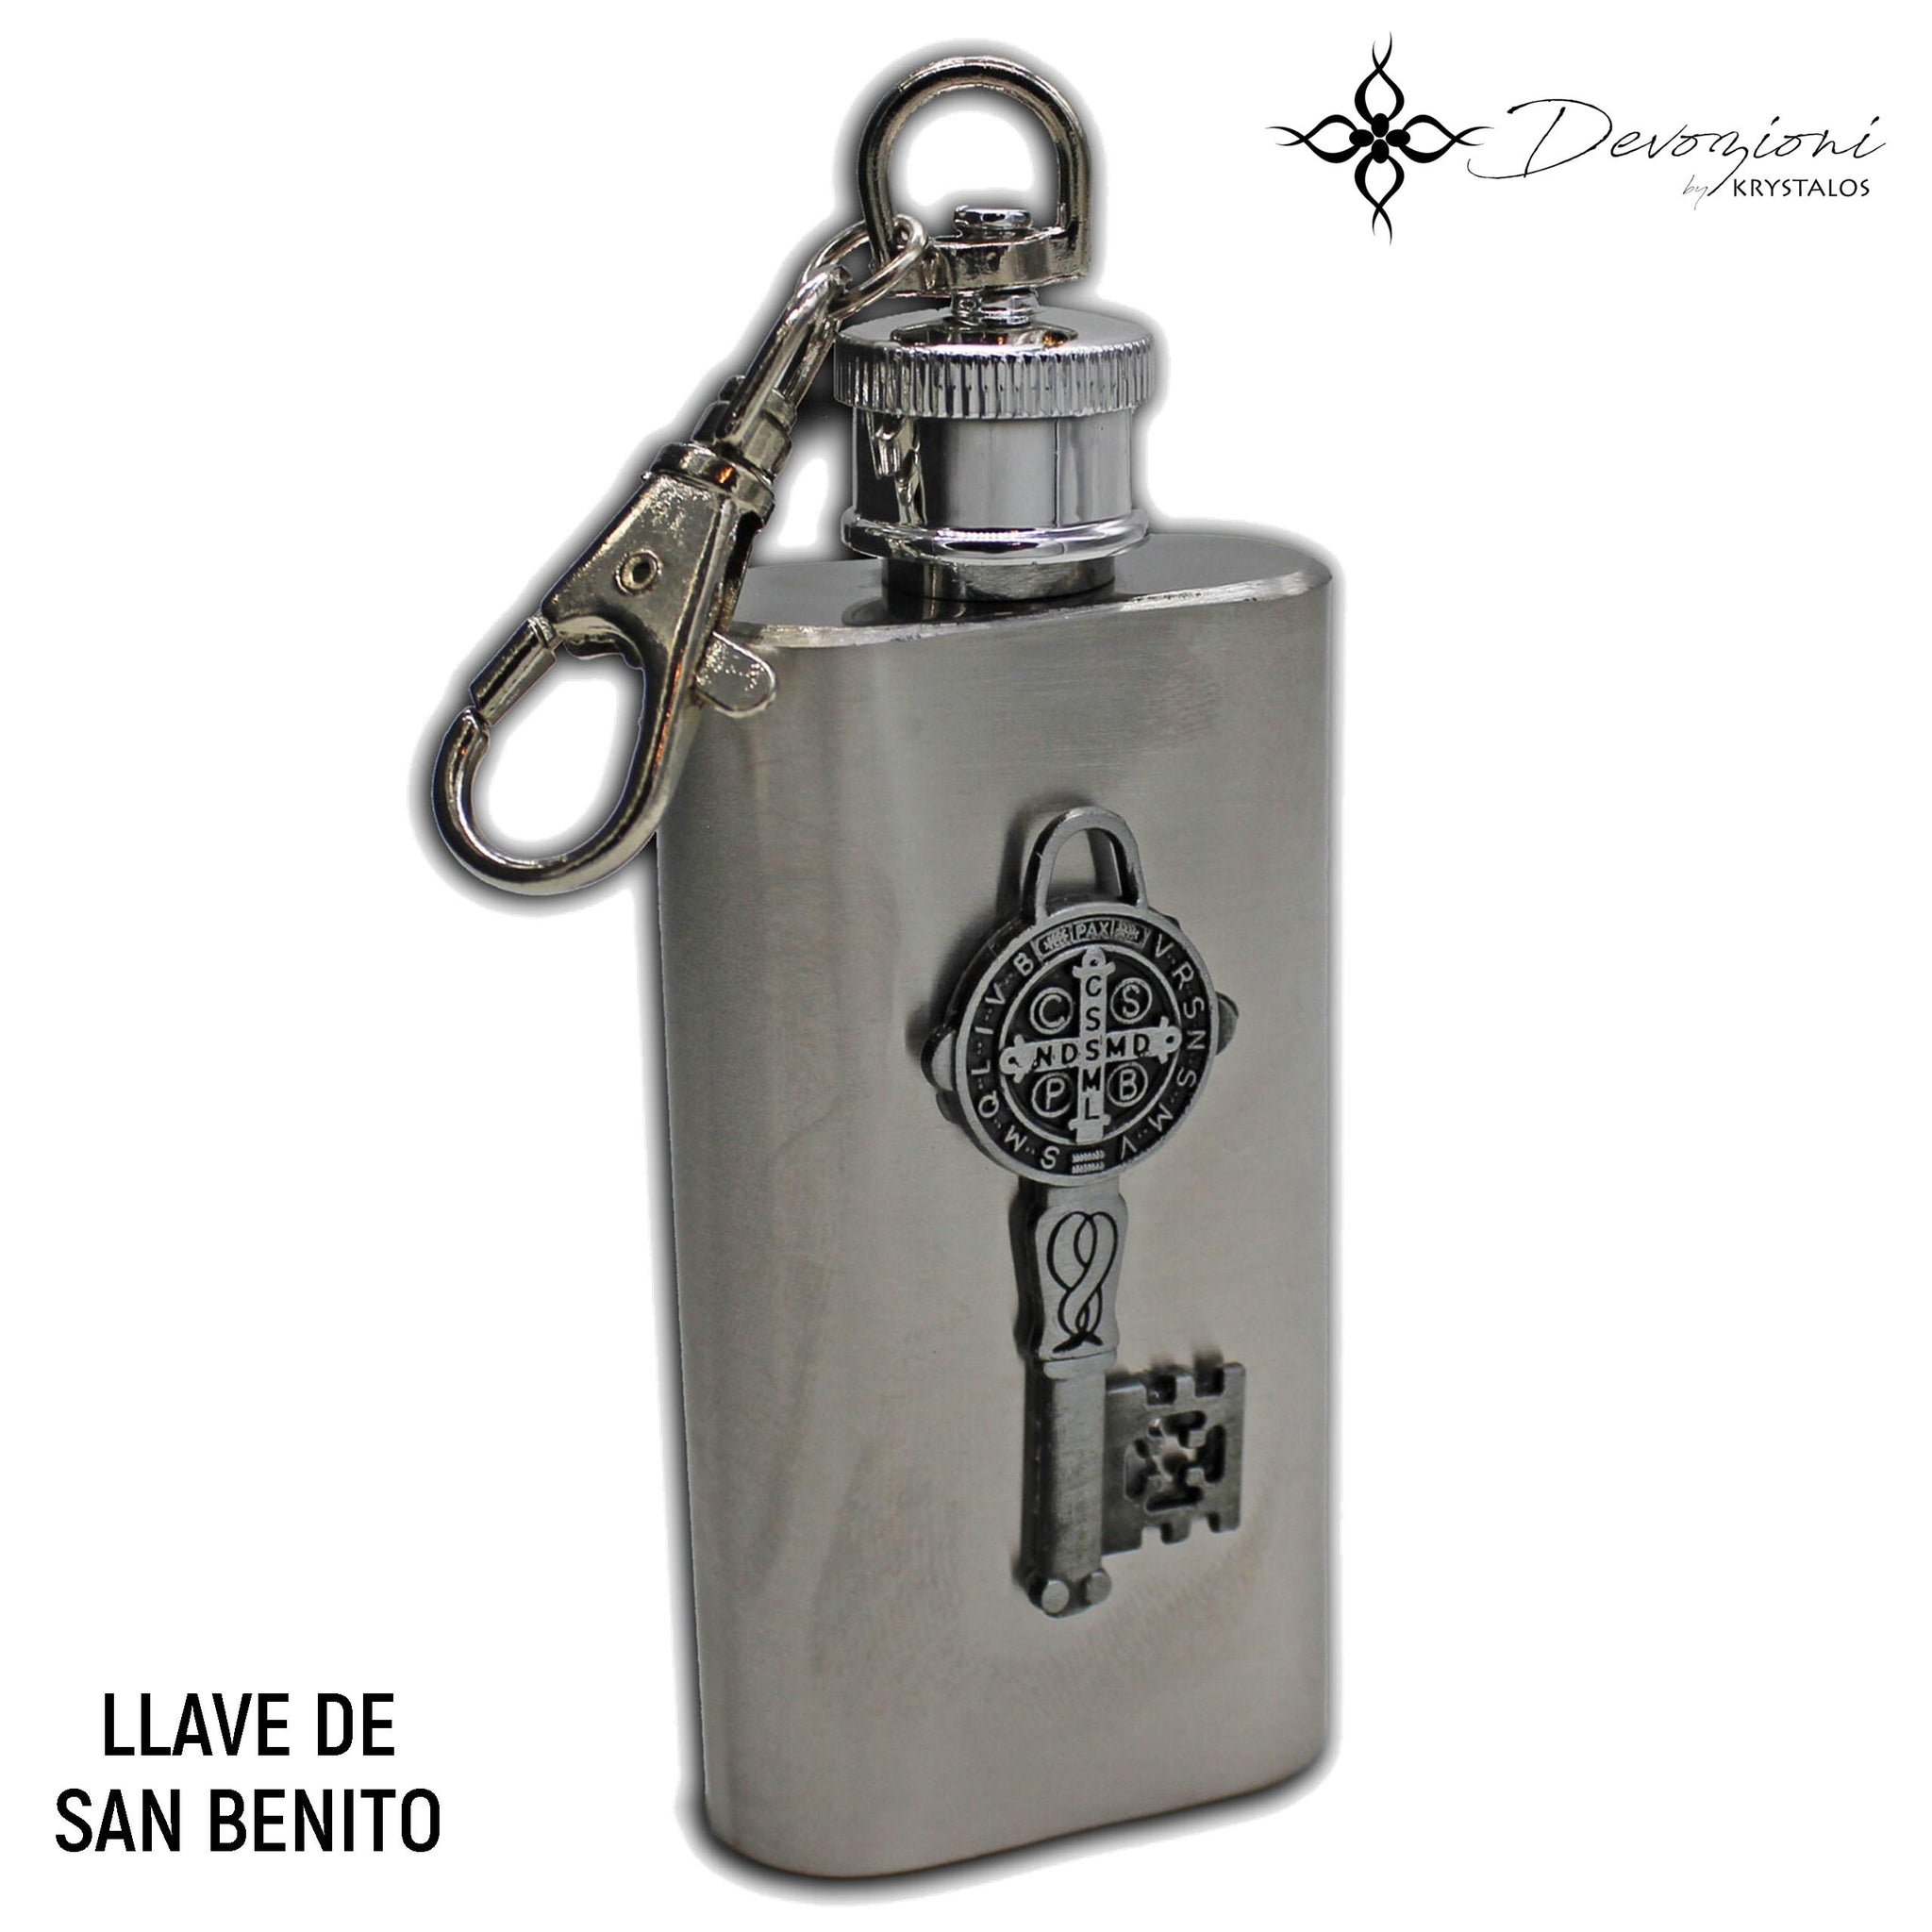 Saint Benedict's Key - 2 OZ Stainless Steel Bottle for Sacramentals (Holy Water, Holy Oils, etc.)